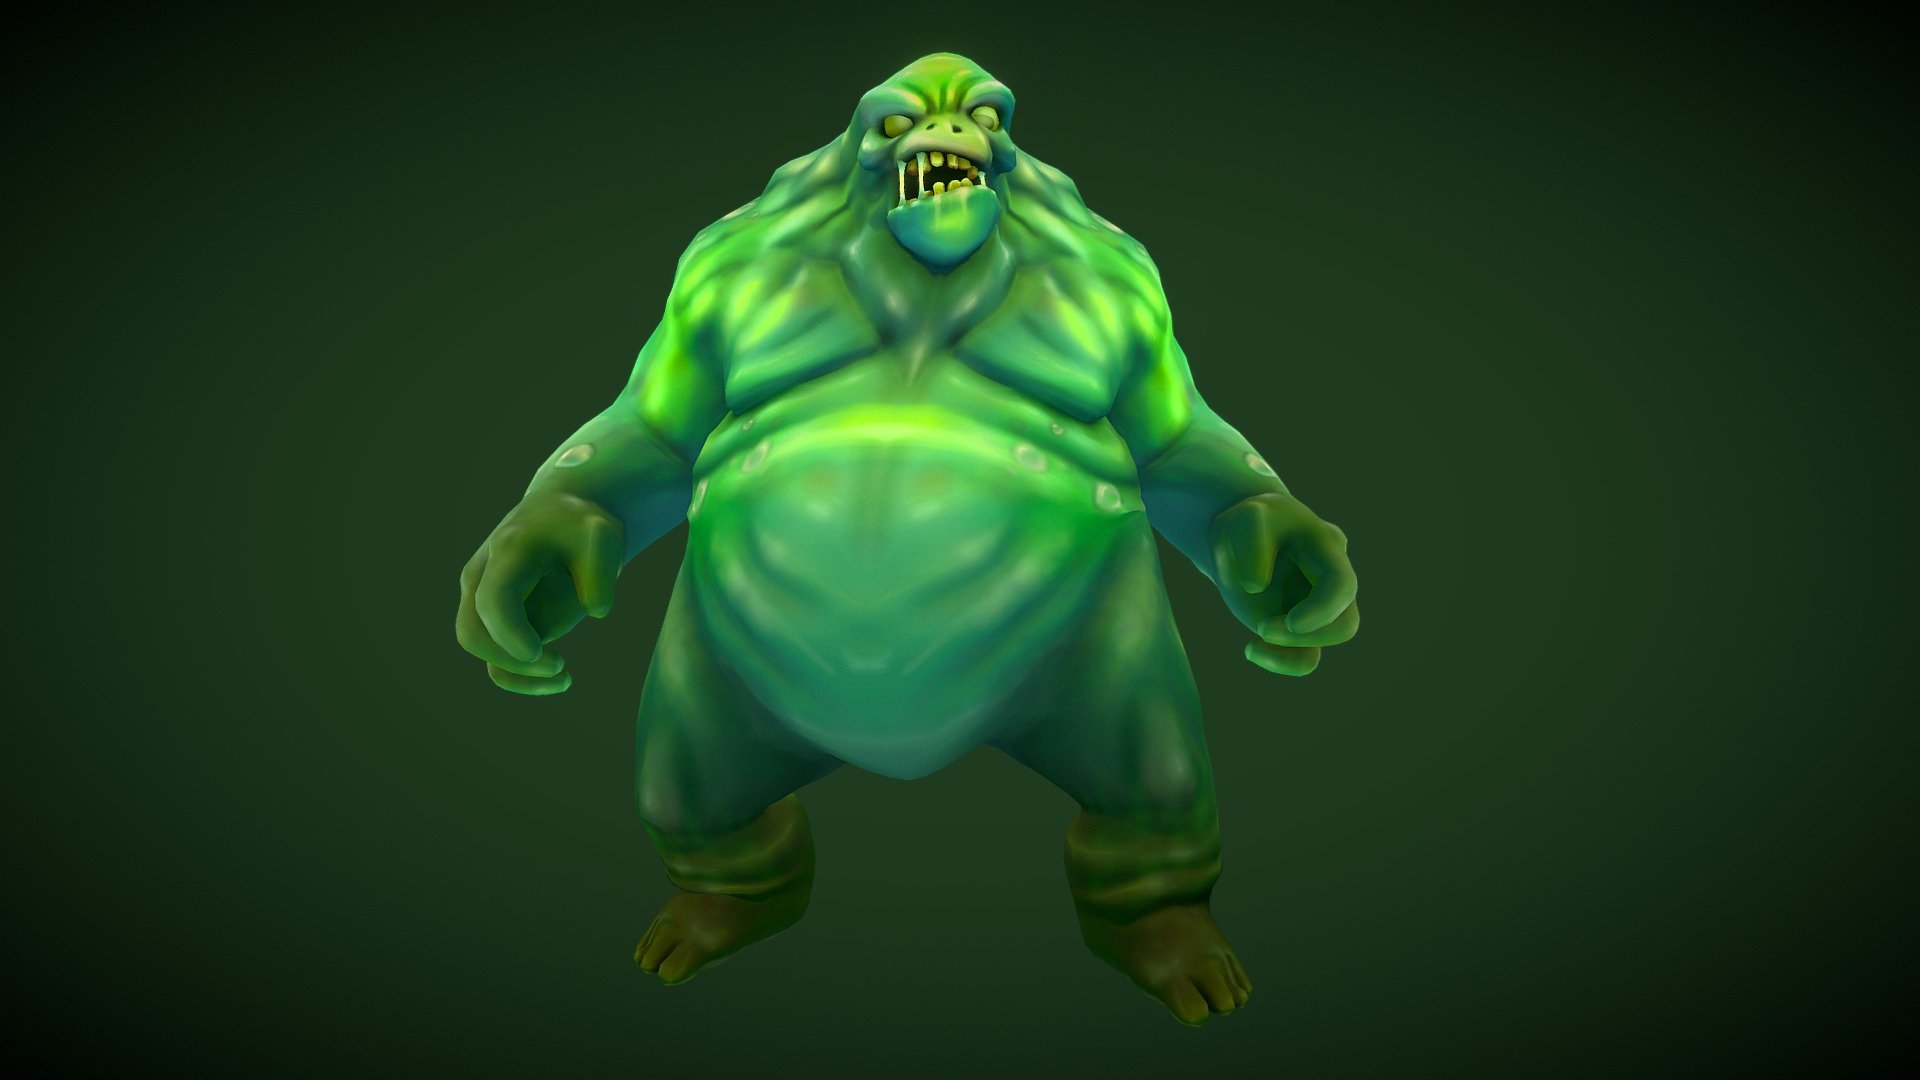 Stylized character for a project.

Software used: Zbrush, Autodesk Maya, Autodesk 3ds Max, Substance Painter - Stylized Fantasy Slime man - 3D model by N-hance Studio (@Malice6731) 3d model